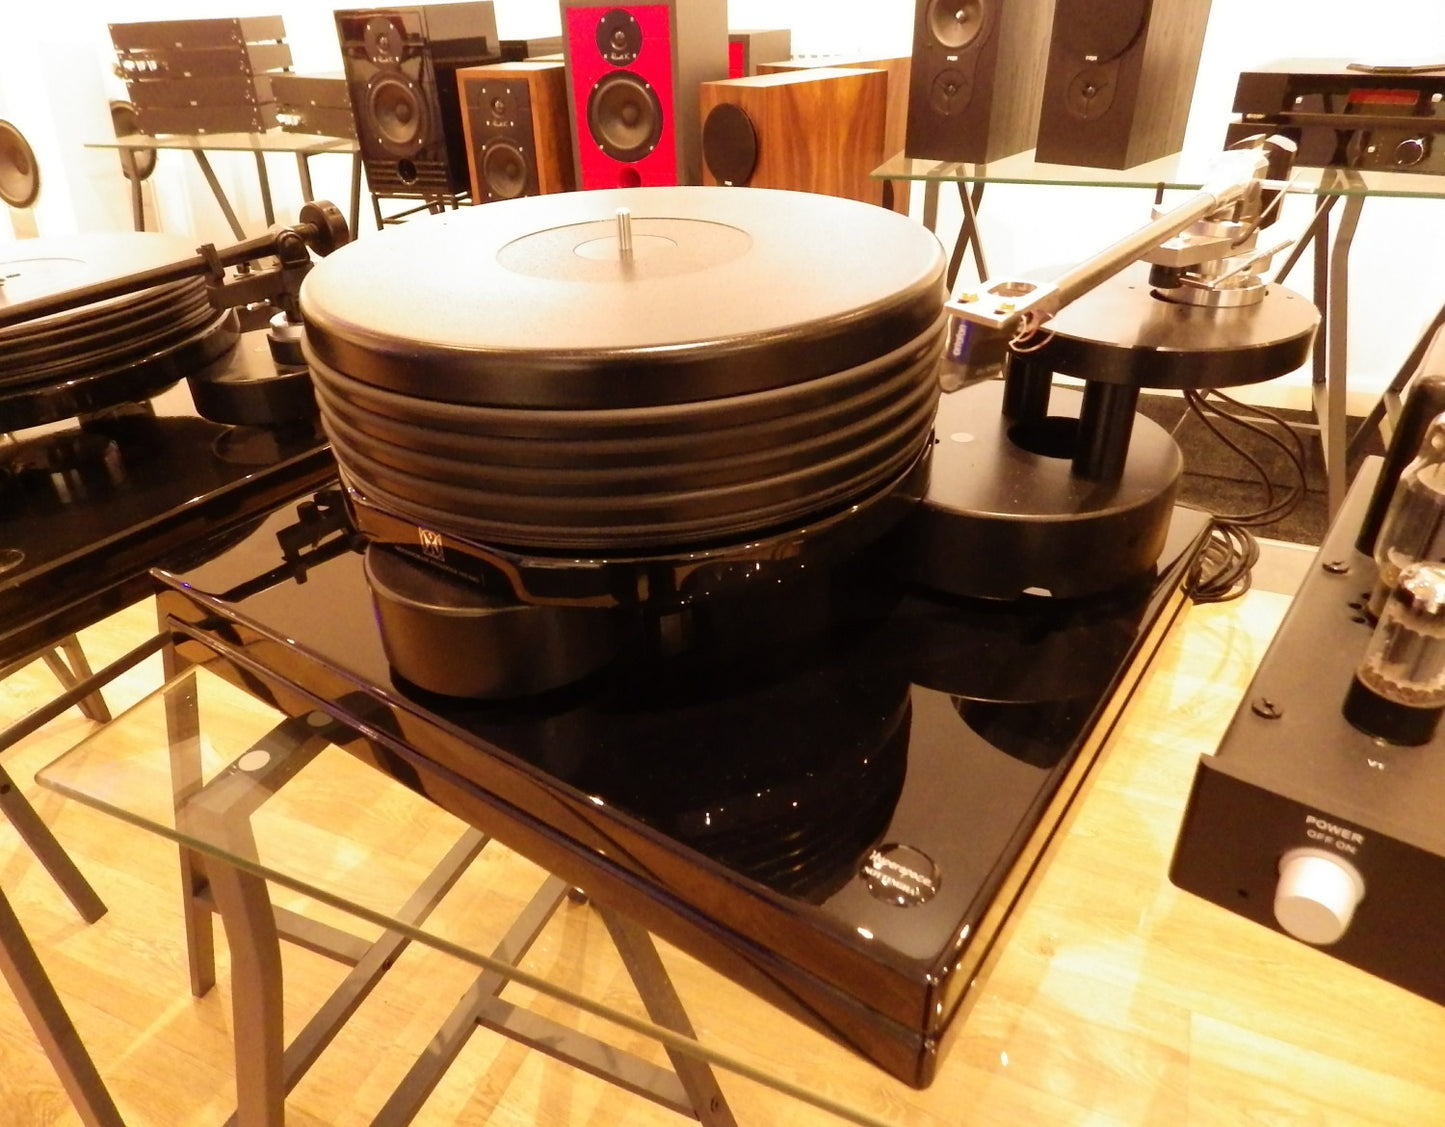 Nottingham Analogue Hyperspace Turntable